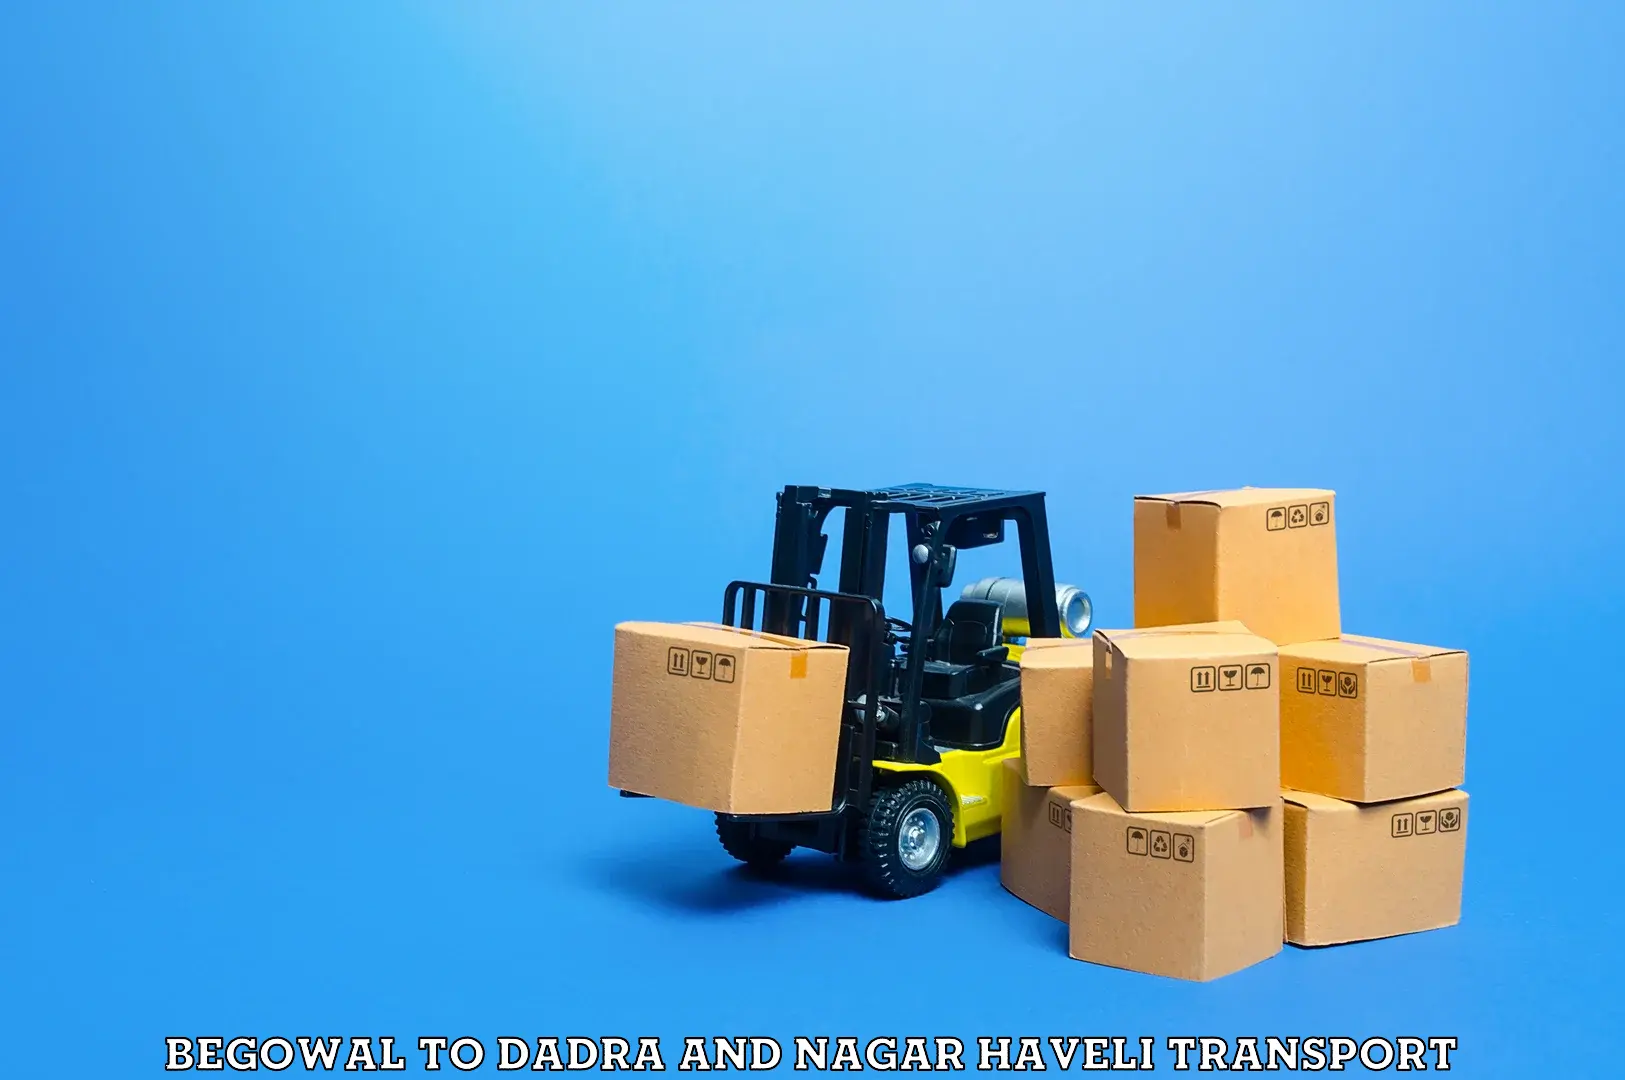 Nearby transport service Begowal to Dadra and Nagar Haveli